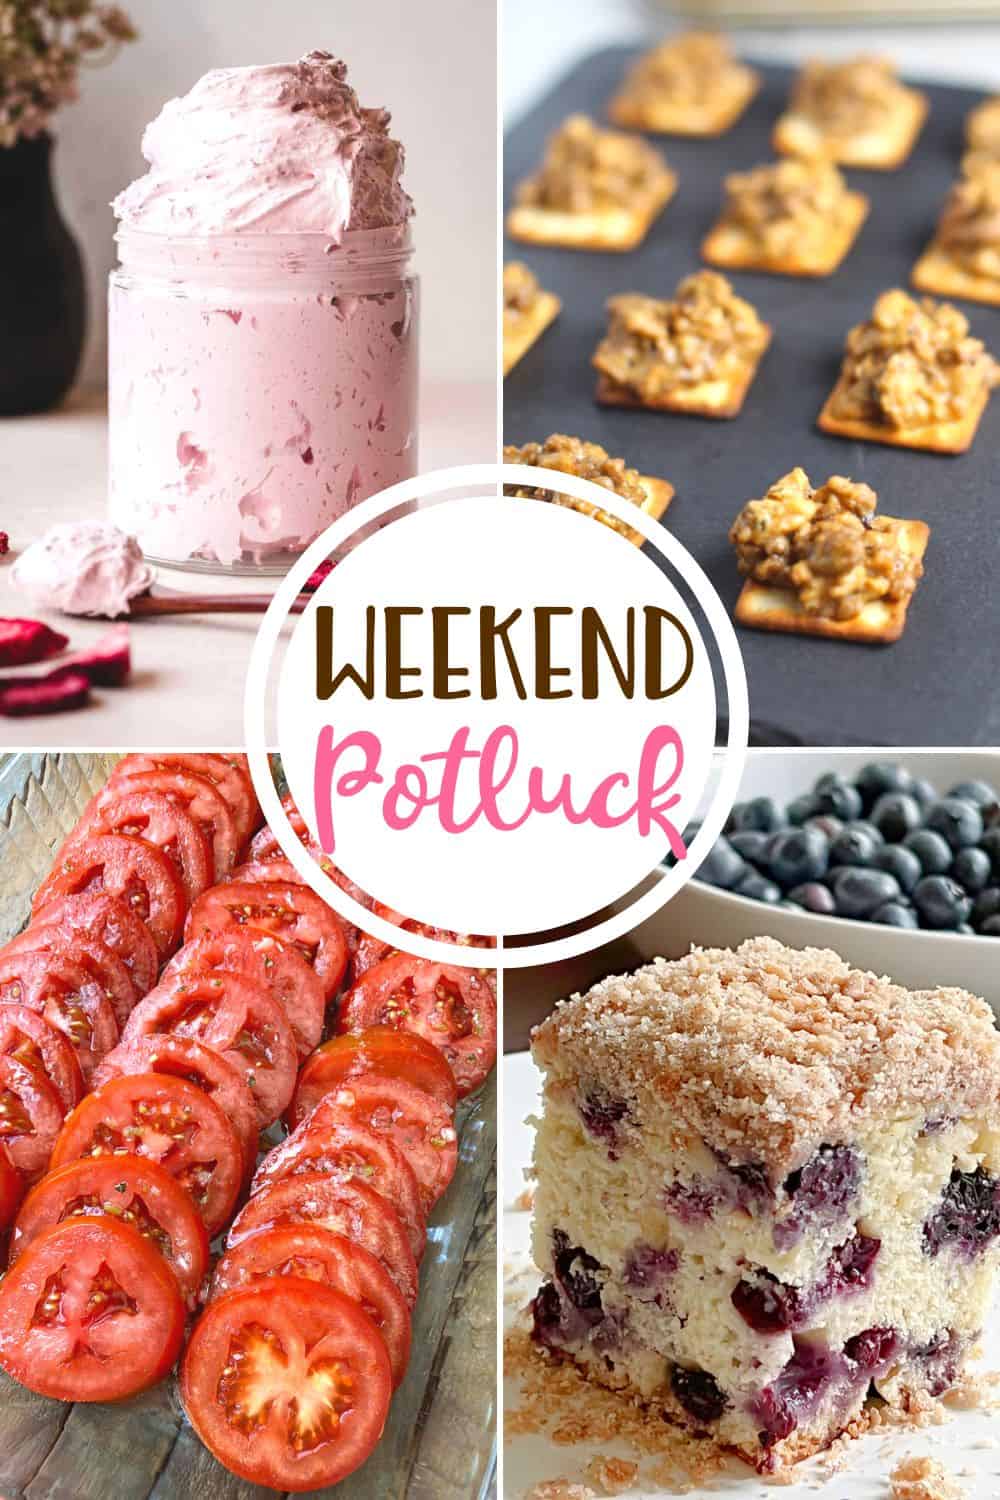 Weekend Potluck featured recipes: Strawberry Marshmallow Fluff, Hanky Panky Appetizer, Marinated Tomatoes and Blueberry Buckle Coffee Cake!